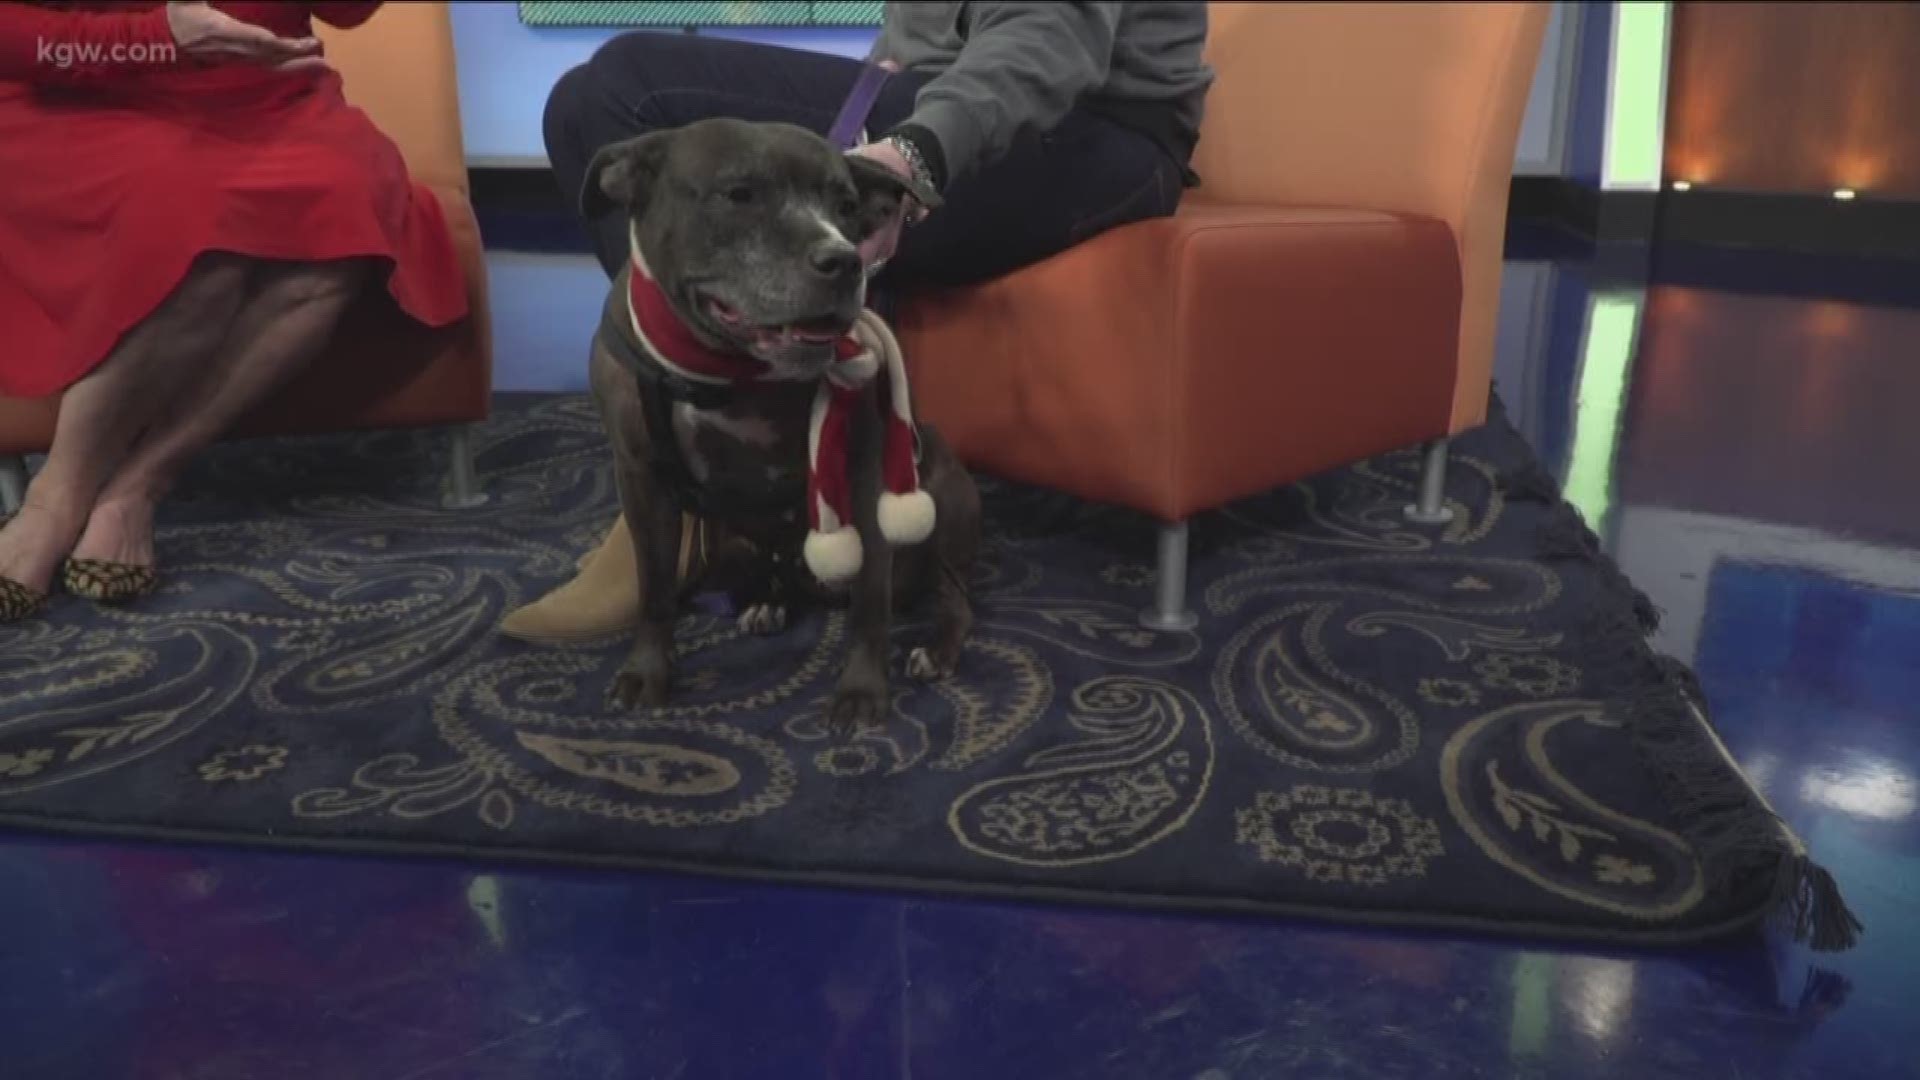 It's 'Happy Howl-idays at KGW and we are featuring dogs available for adoption.